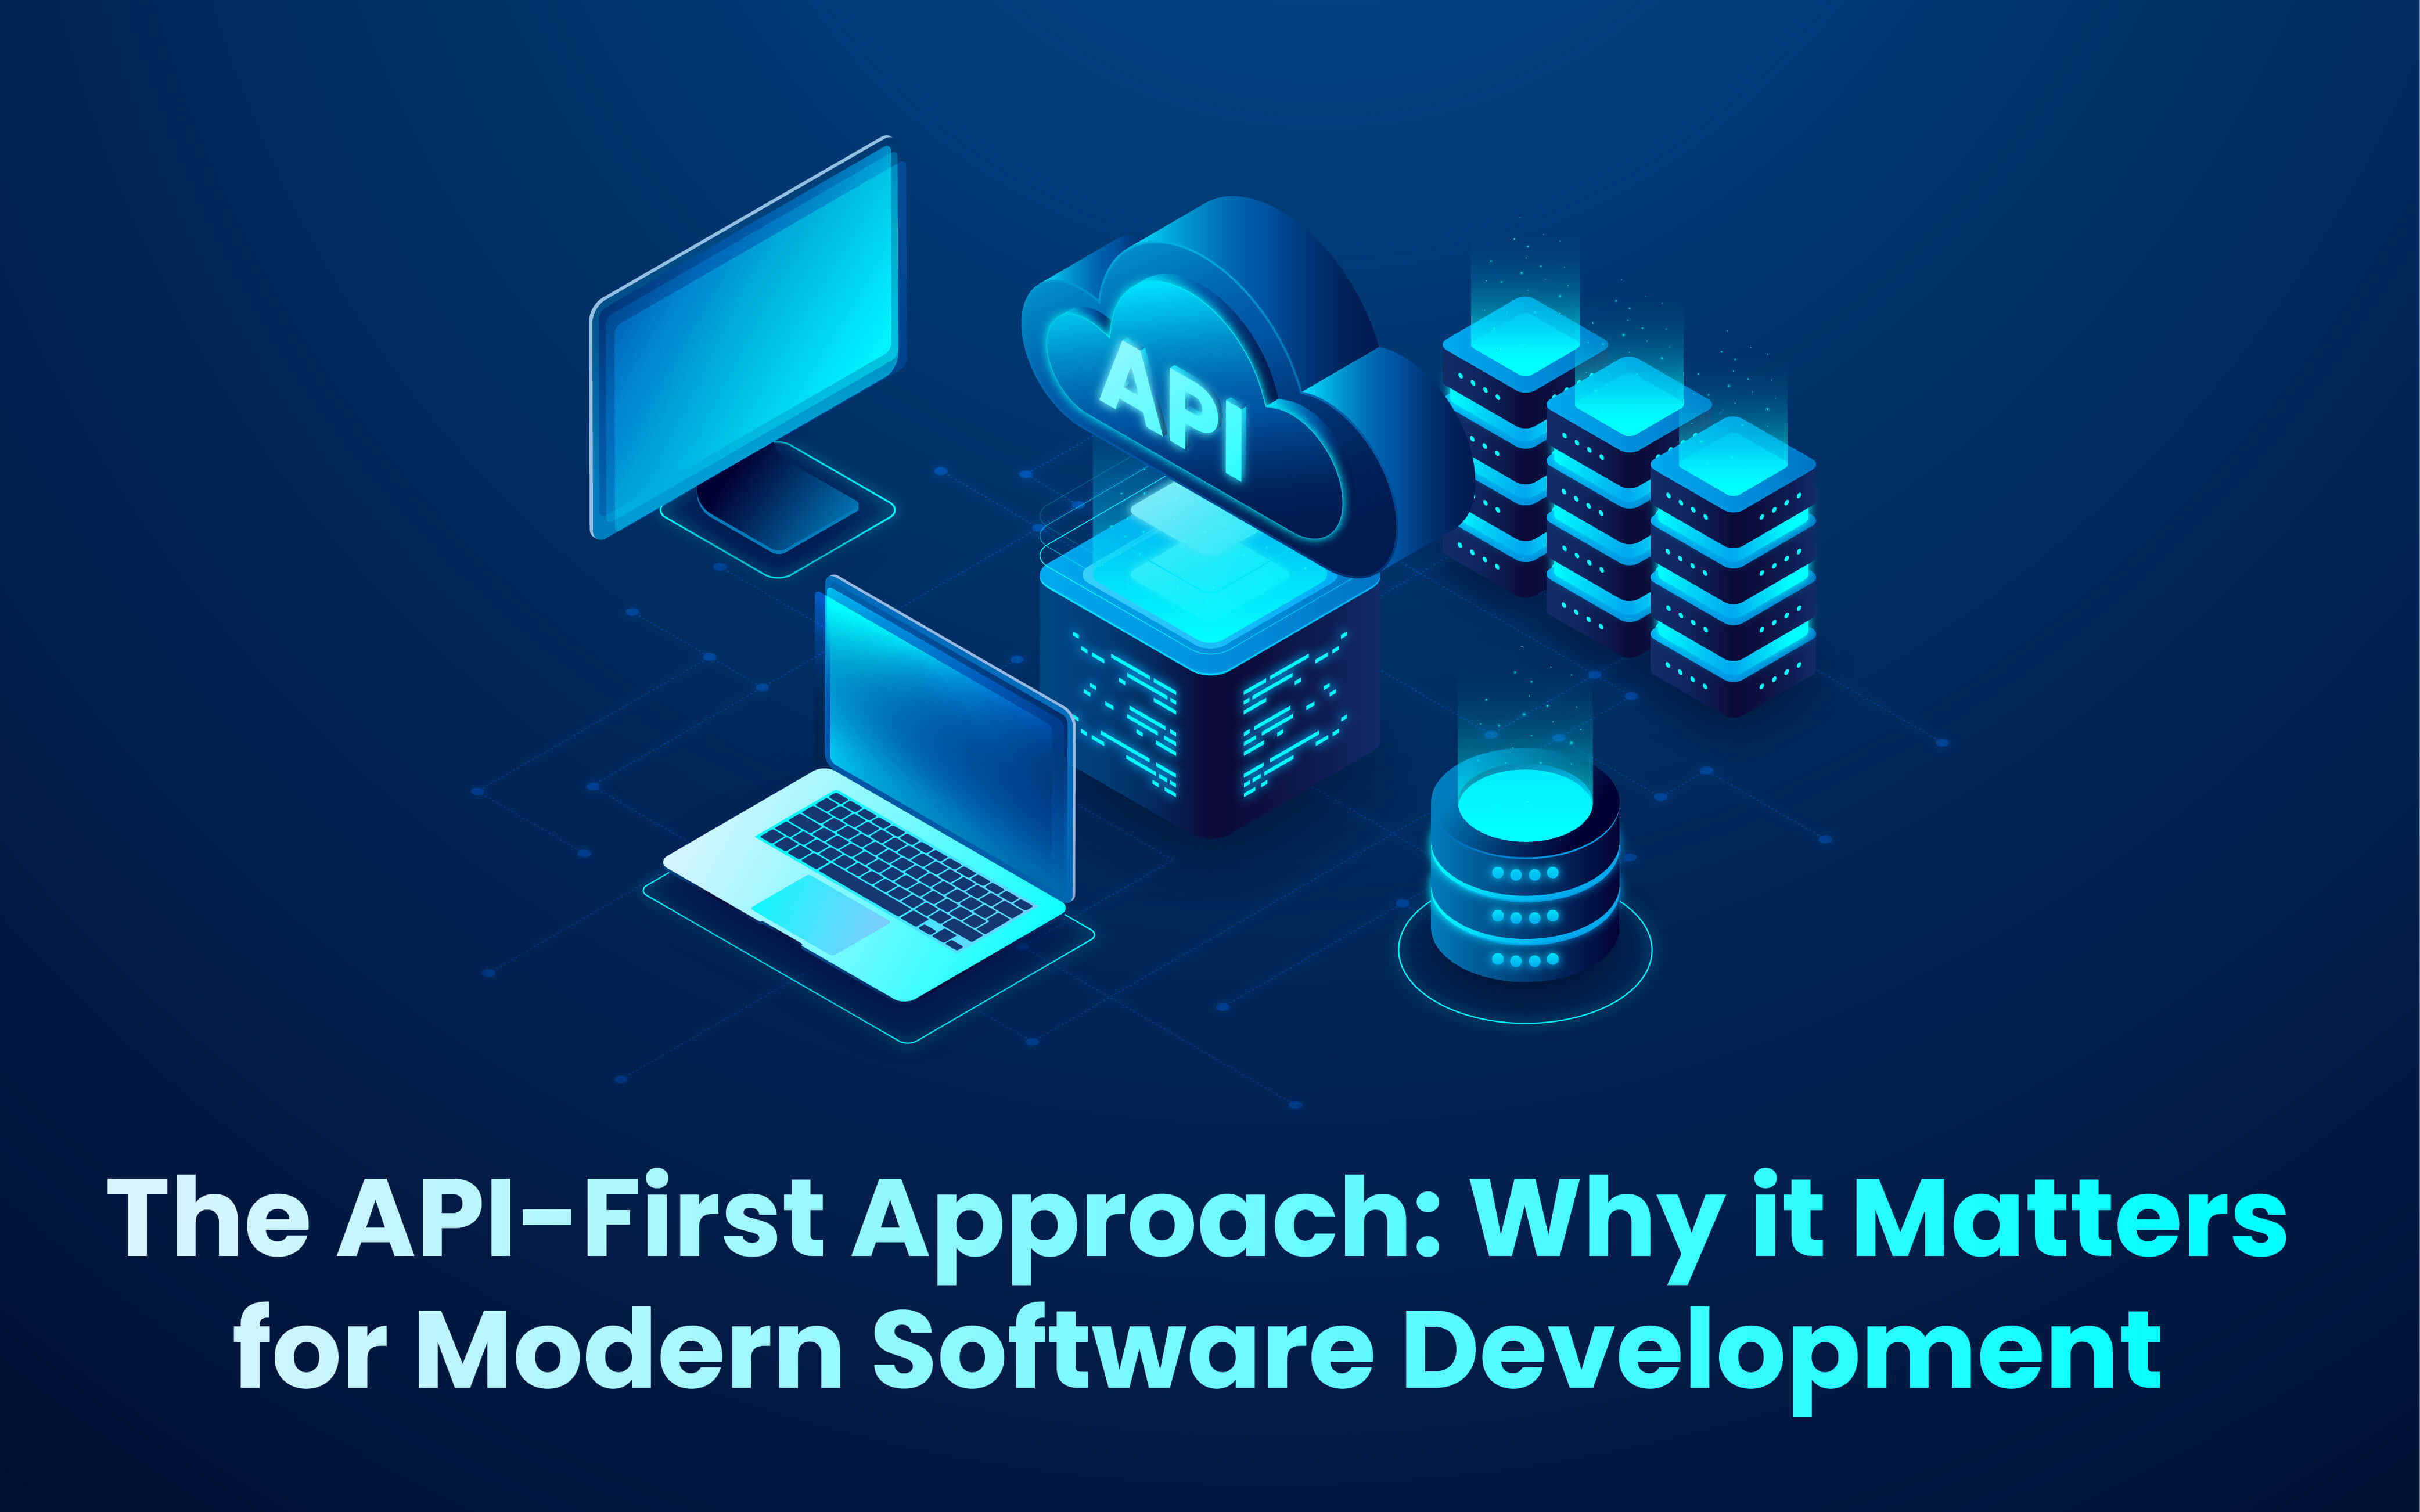 The API-First Approach: Why it Matters for Modern Software Development